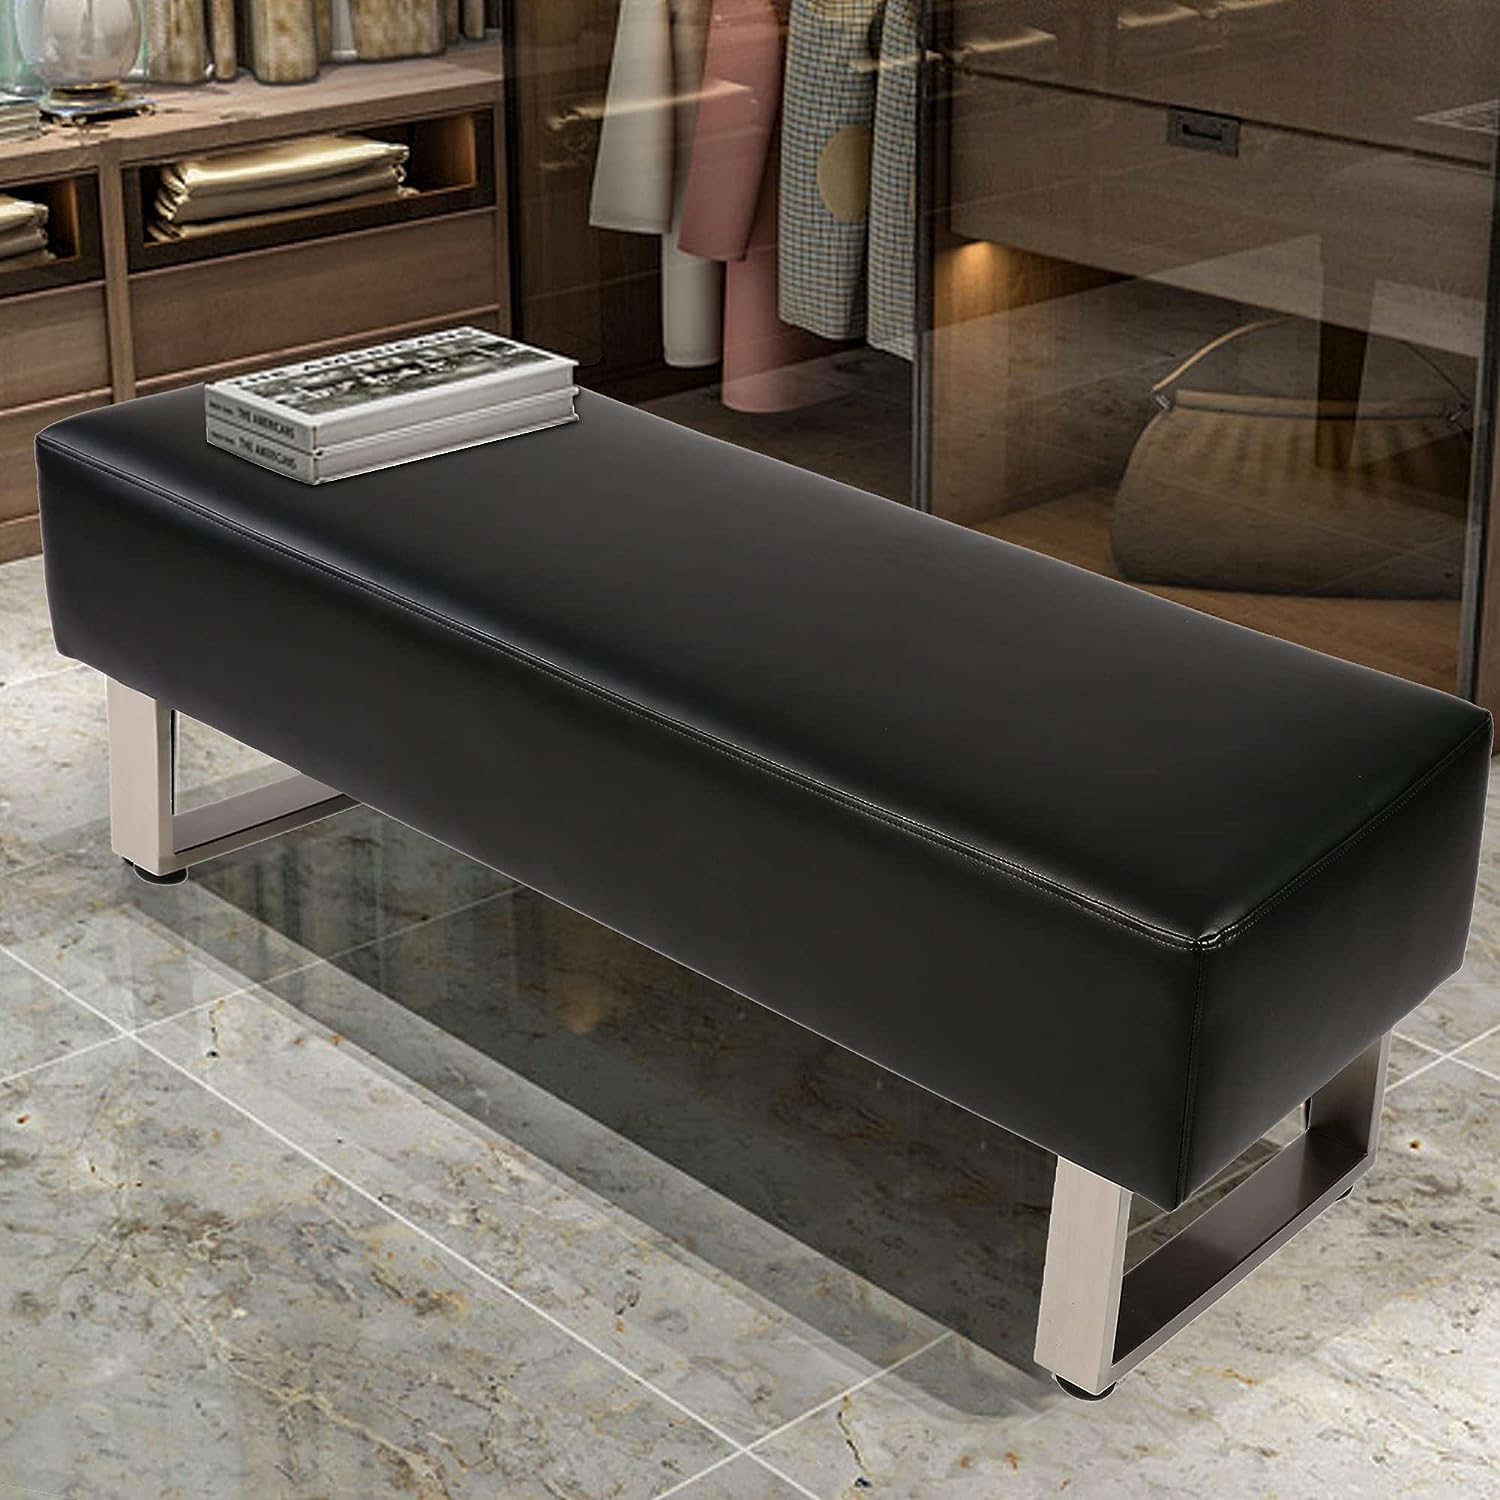 47"L Modern PU Leather Dining Room Bench Upholstered Padded Seat, Black